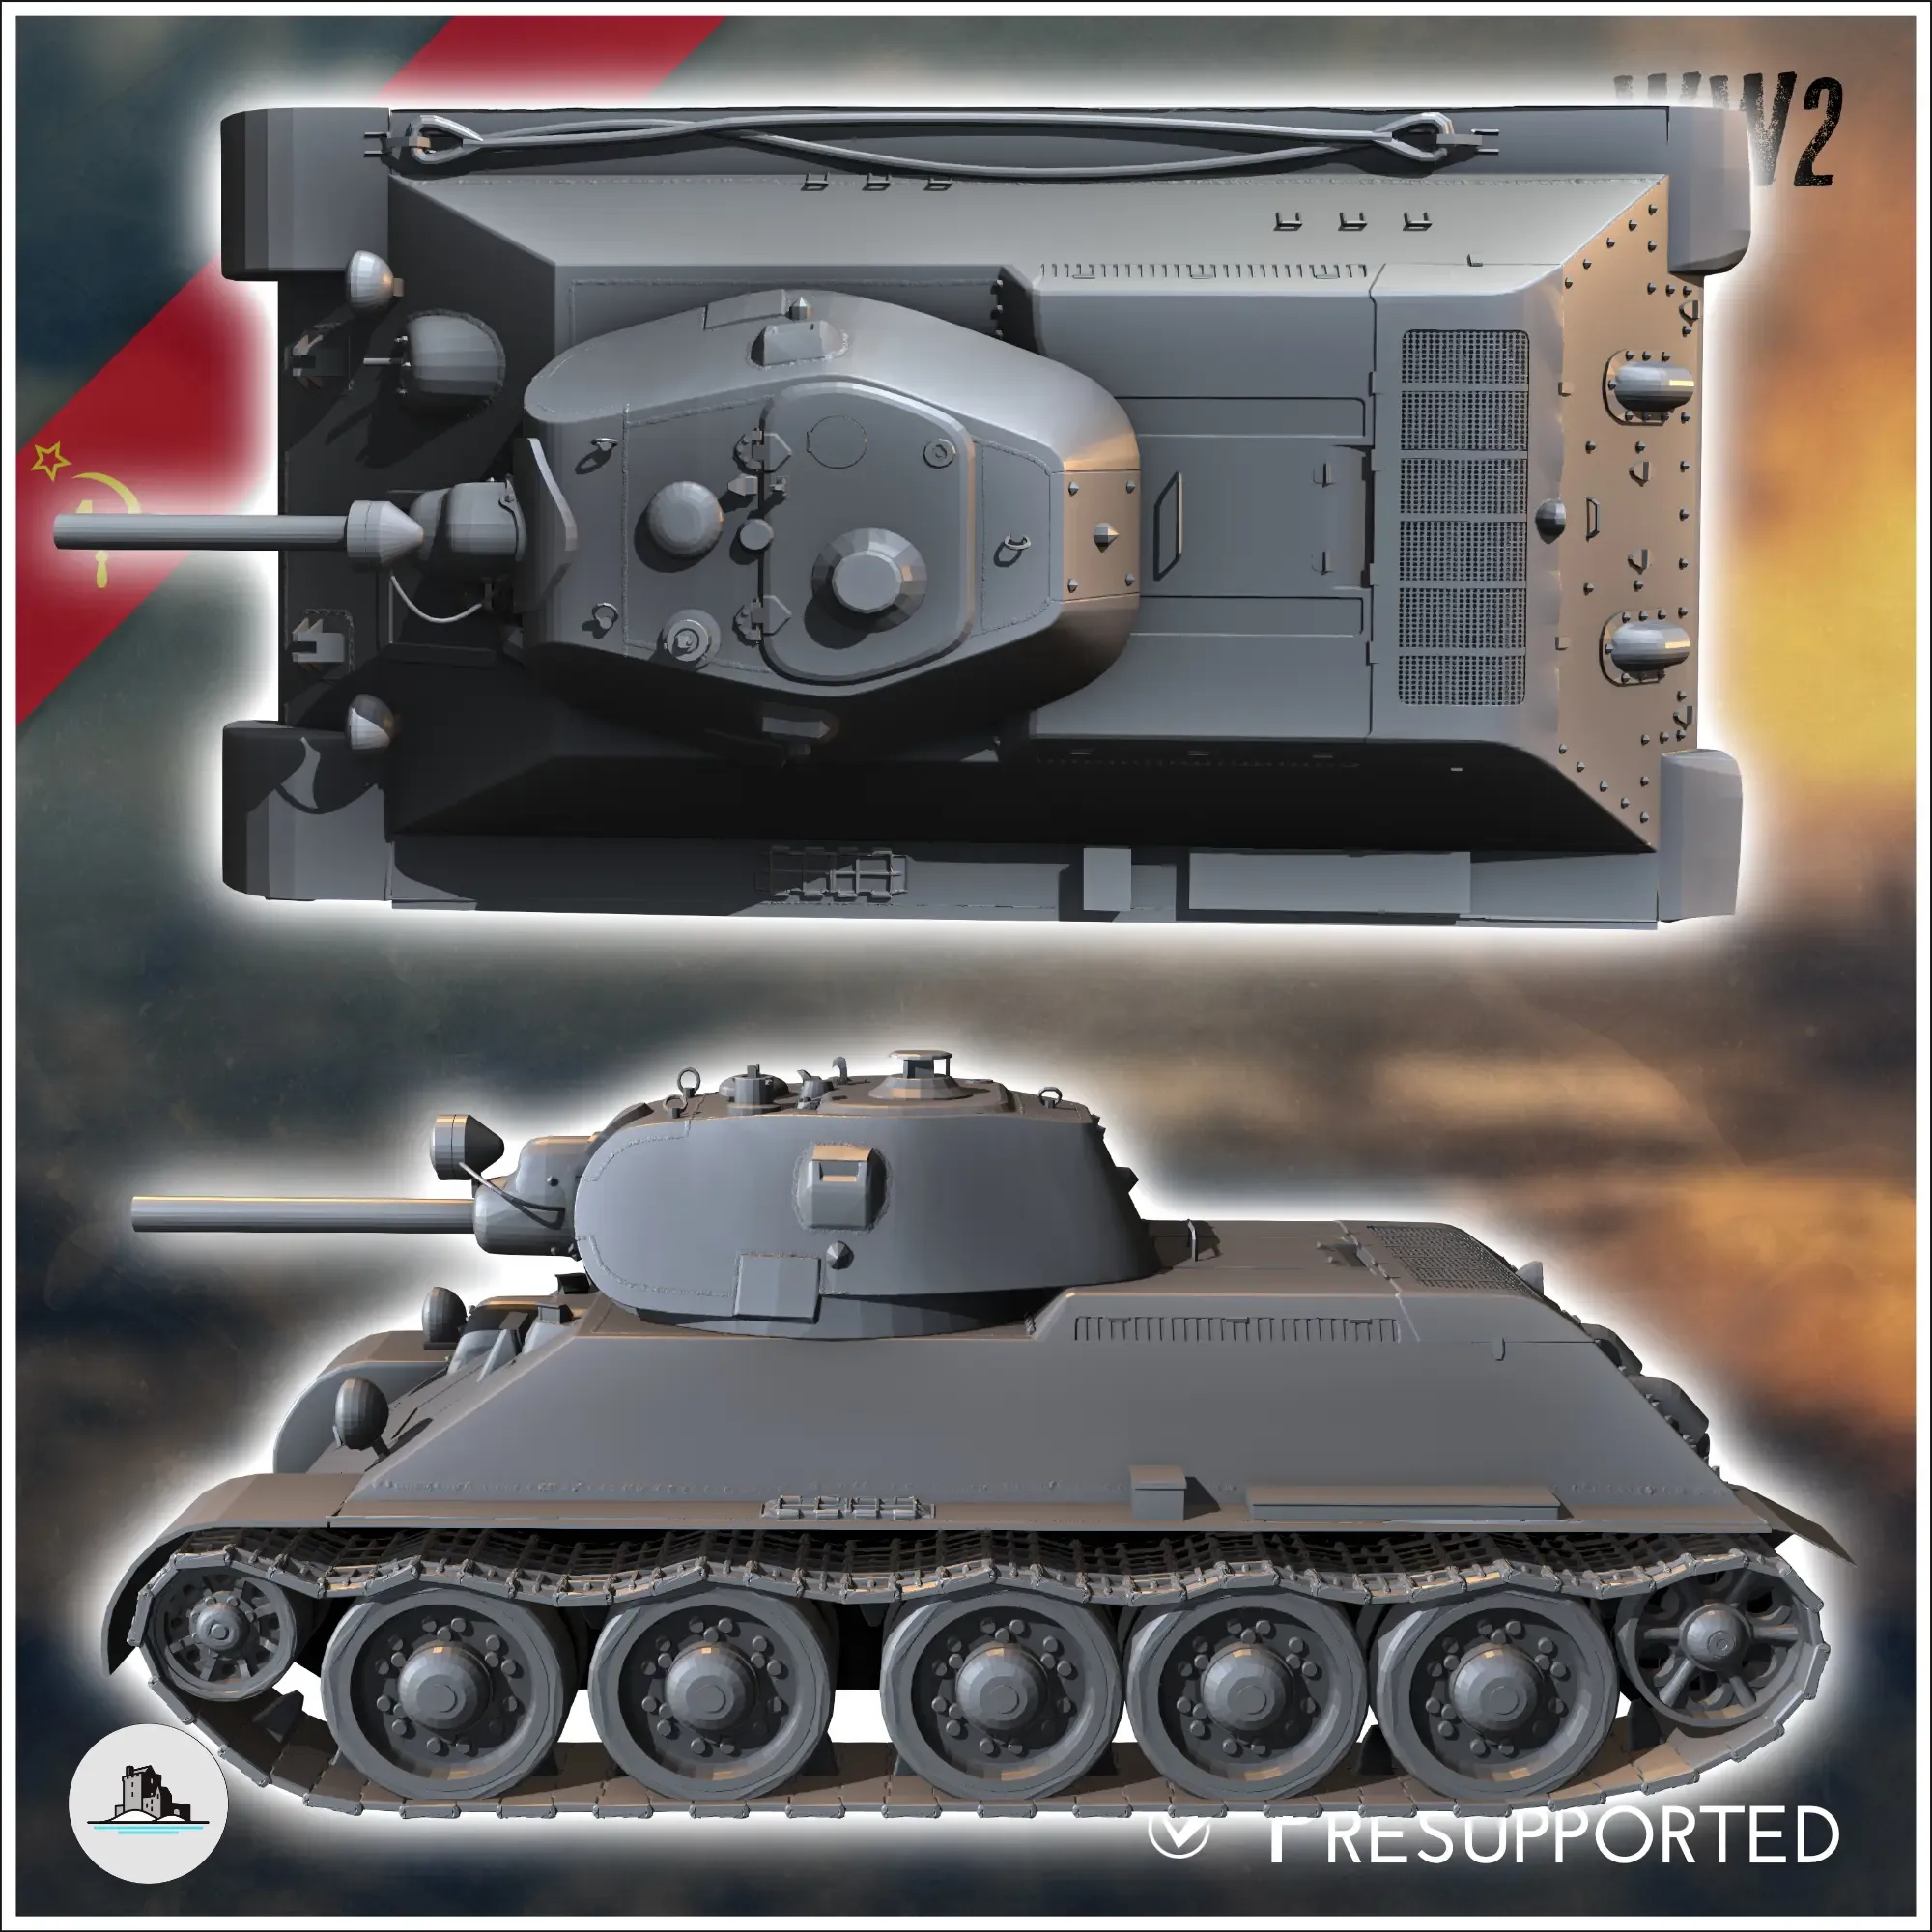 T-34 76 M1940 Model 1940 (T-3476A) with front headlight - mi